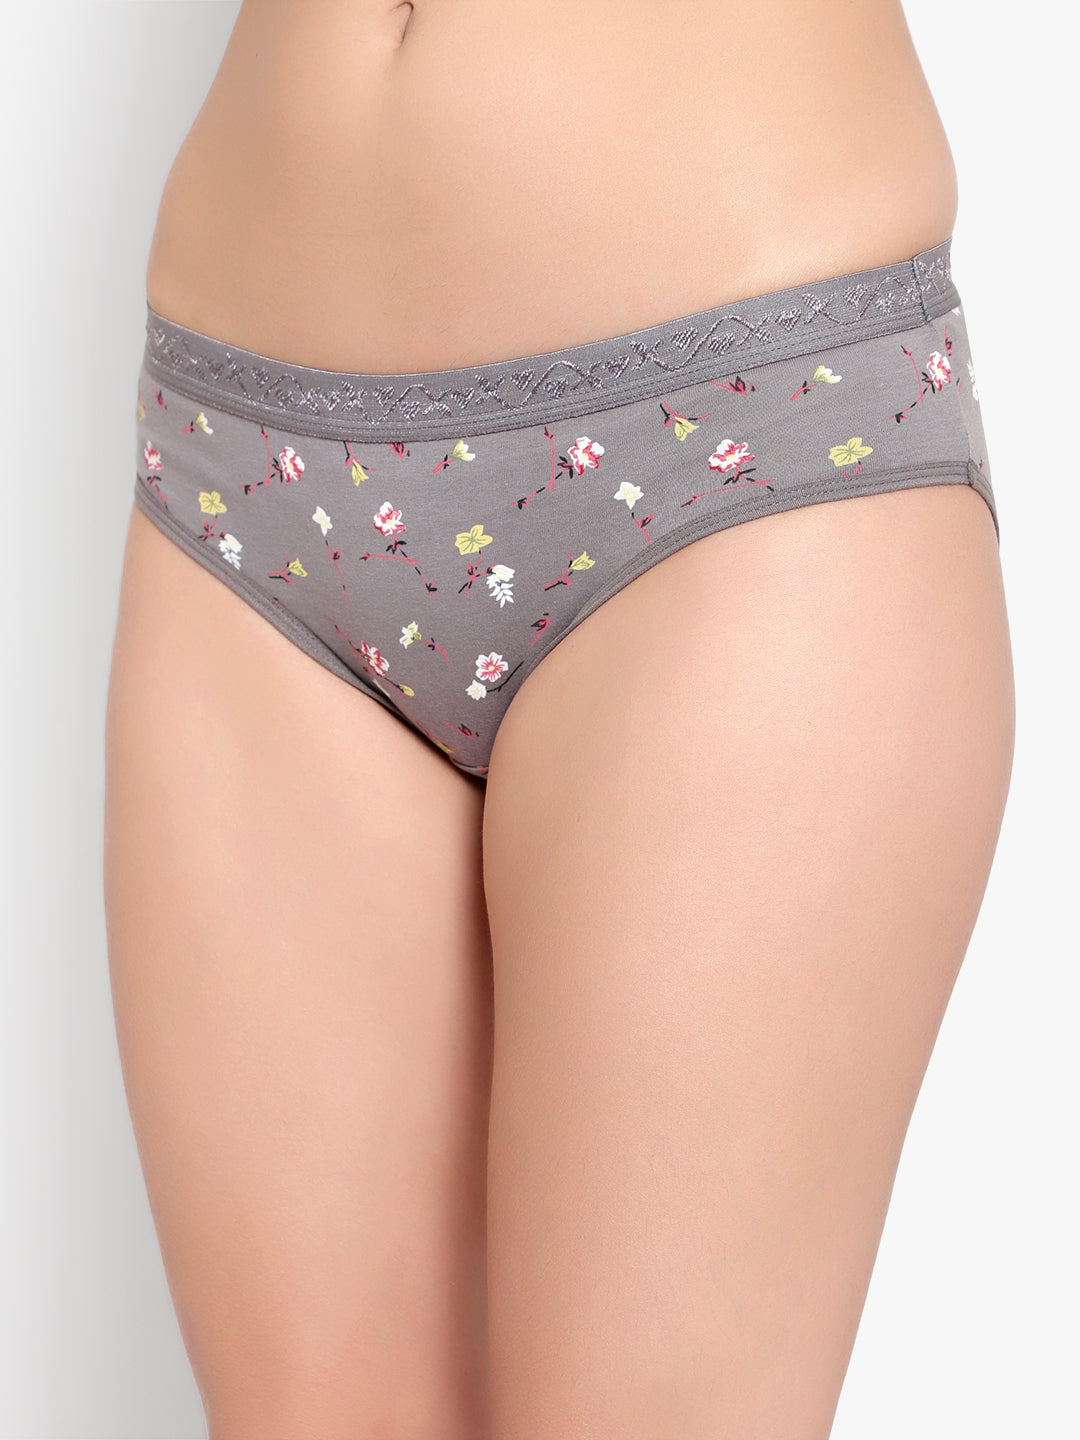 Hipster Floral Printed Women Cotton Underwear at Rs 128/piece in